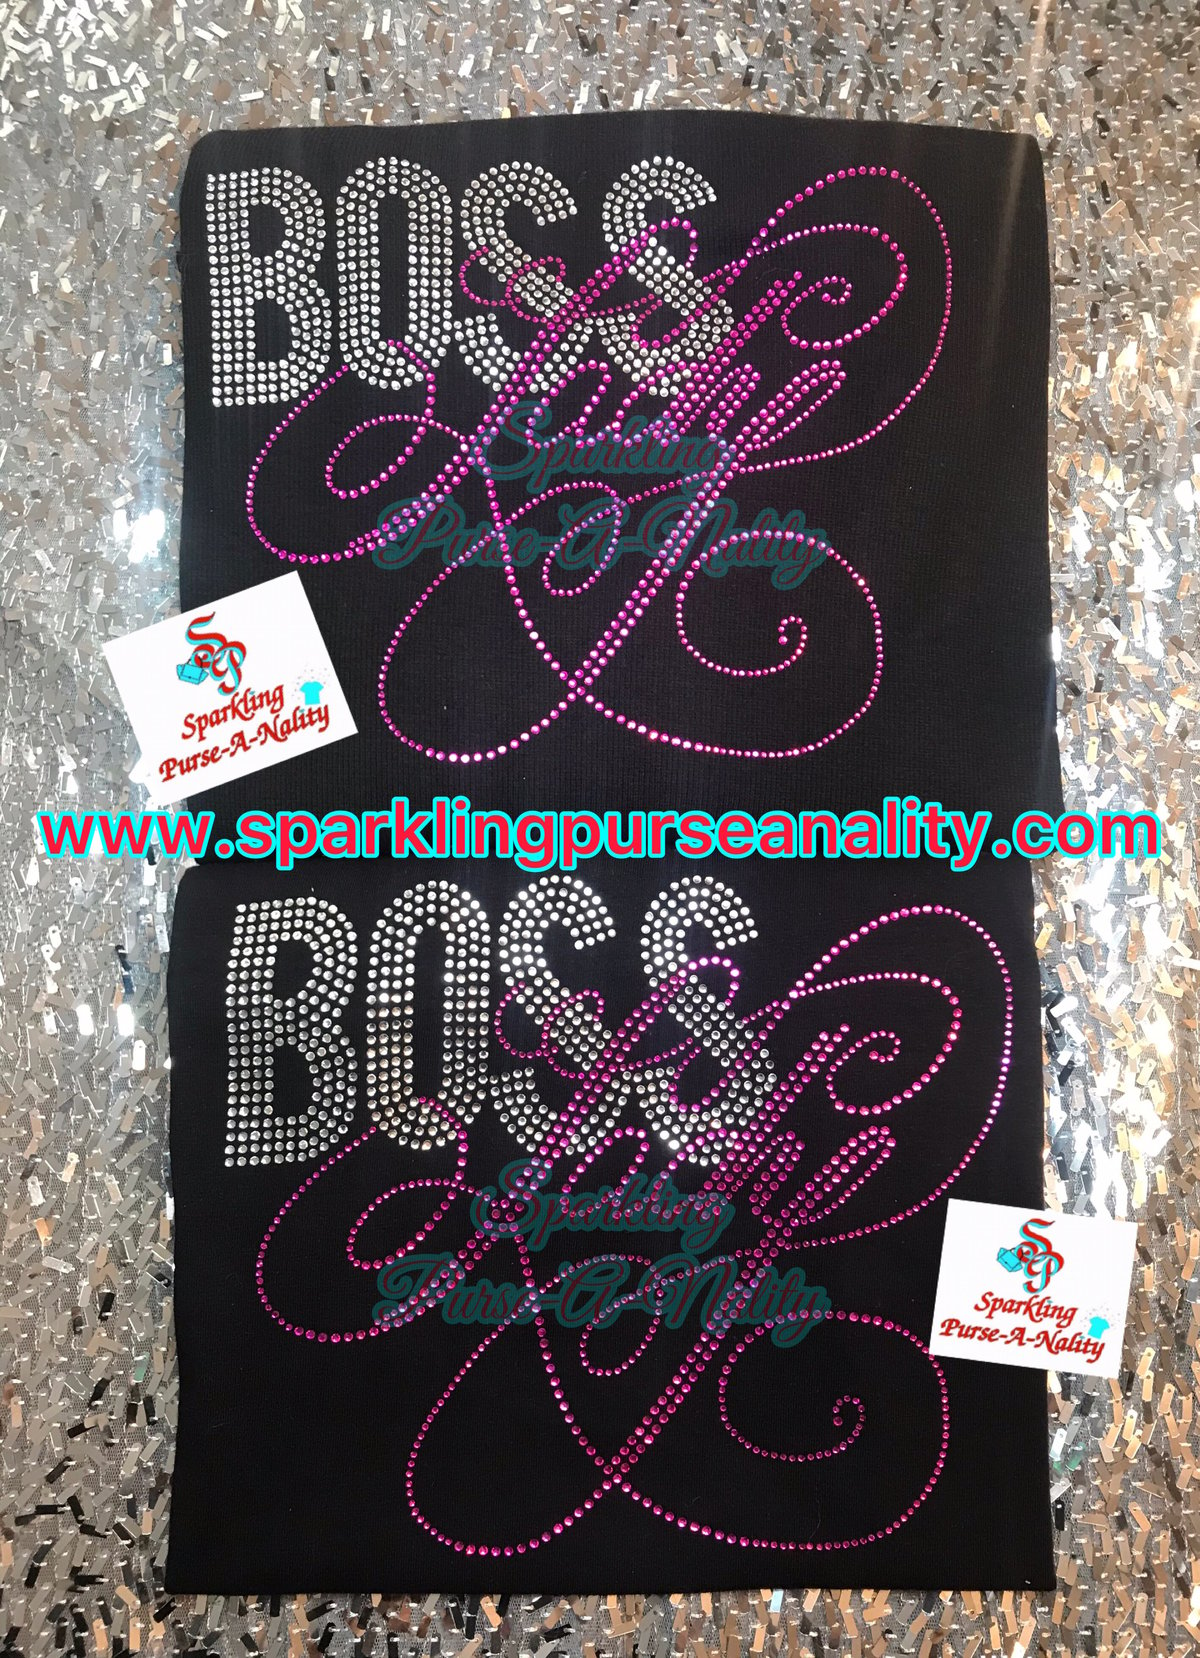 Image of "Sparkling" Boss Lady